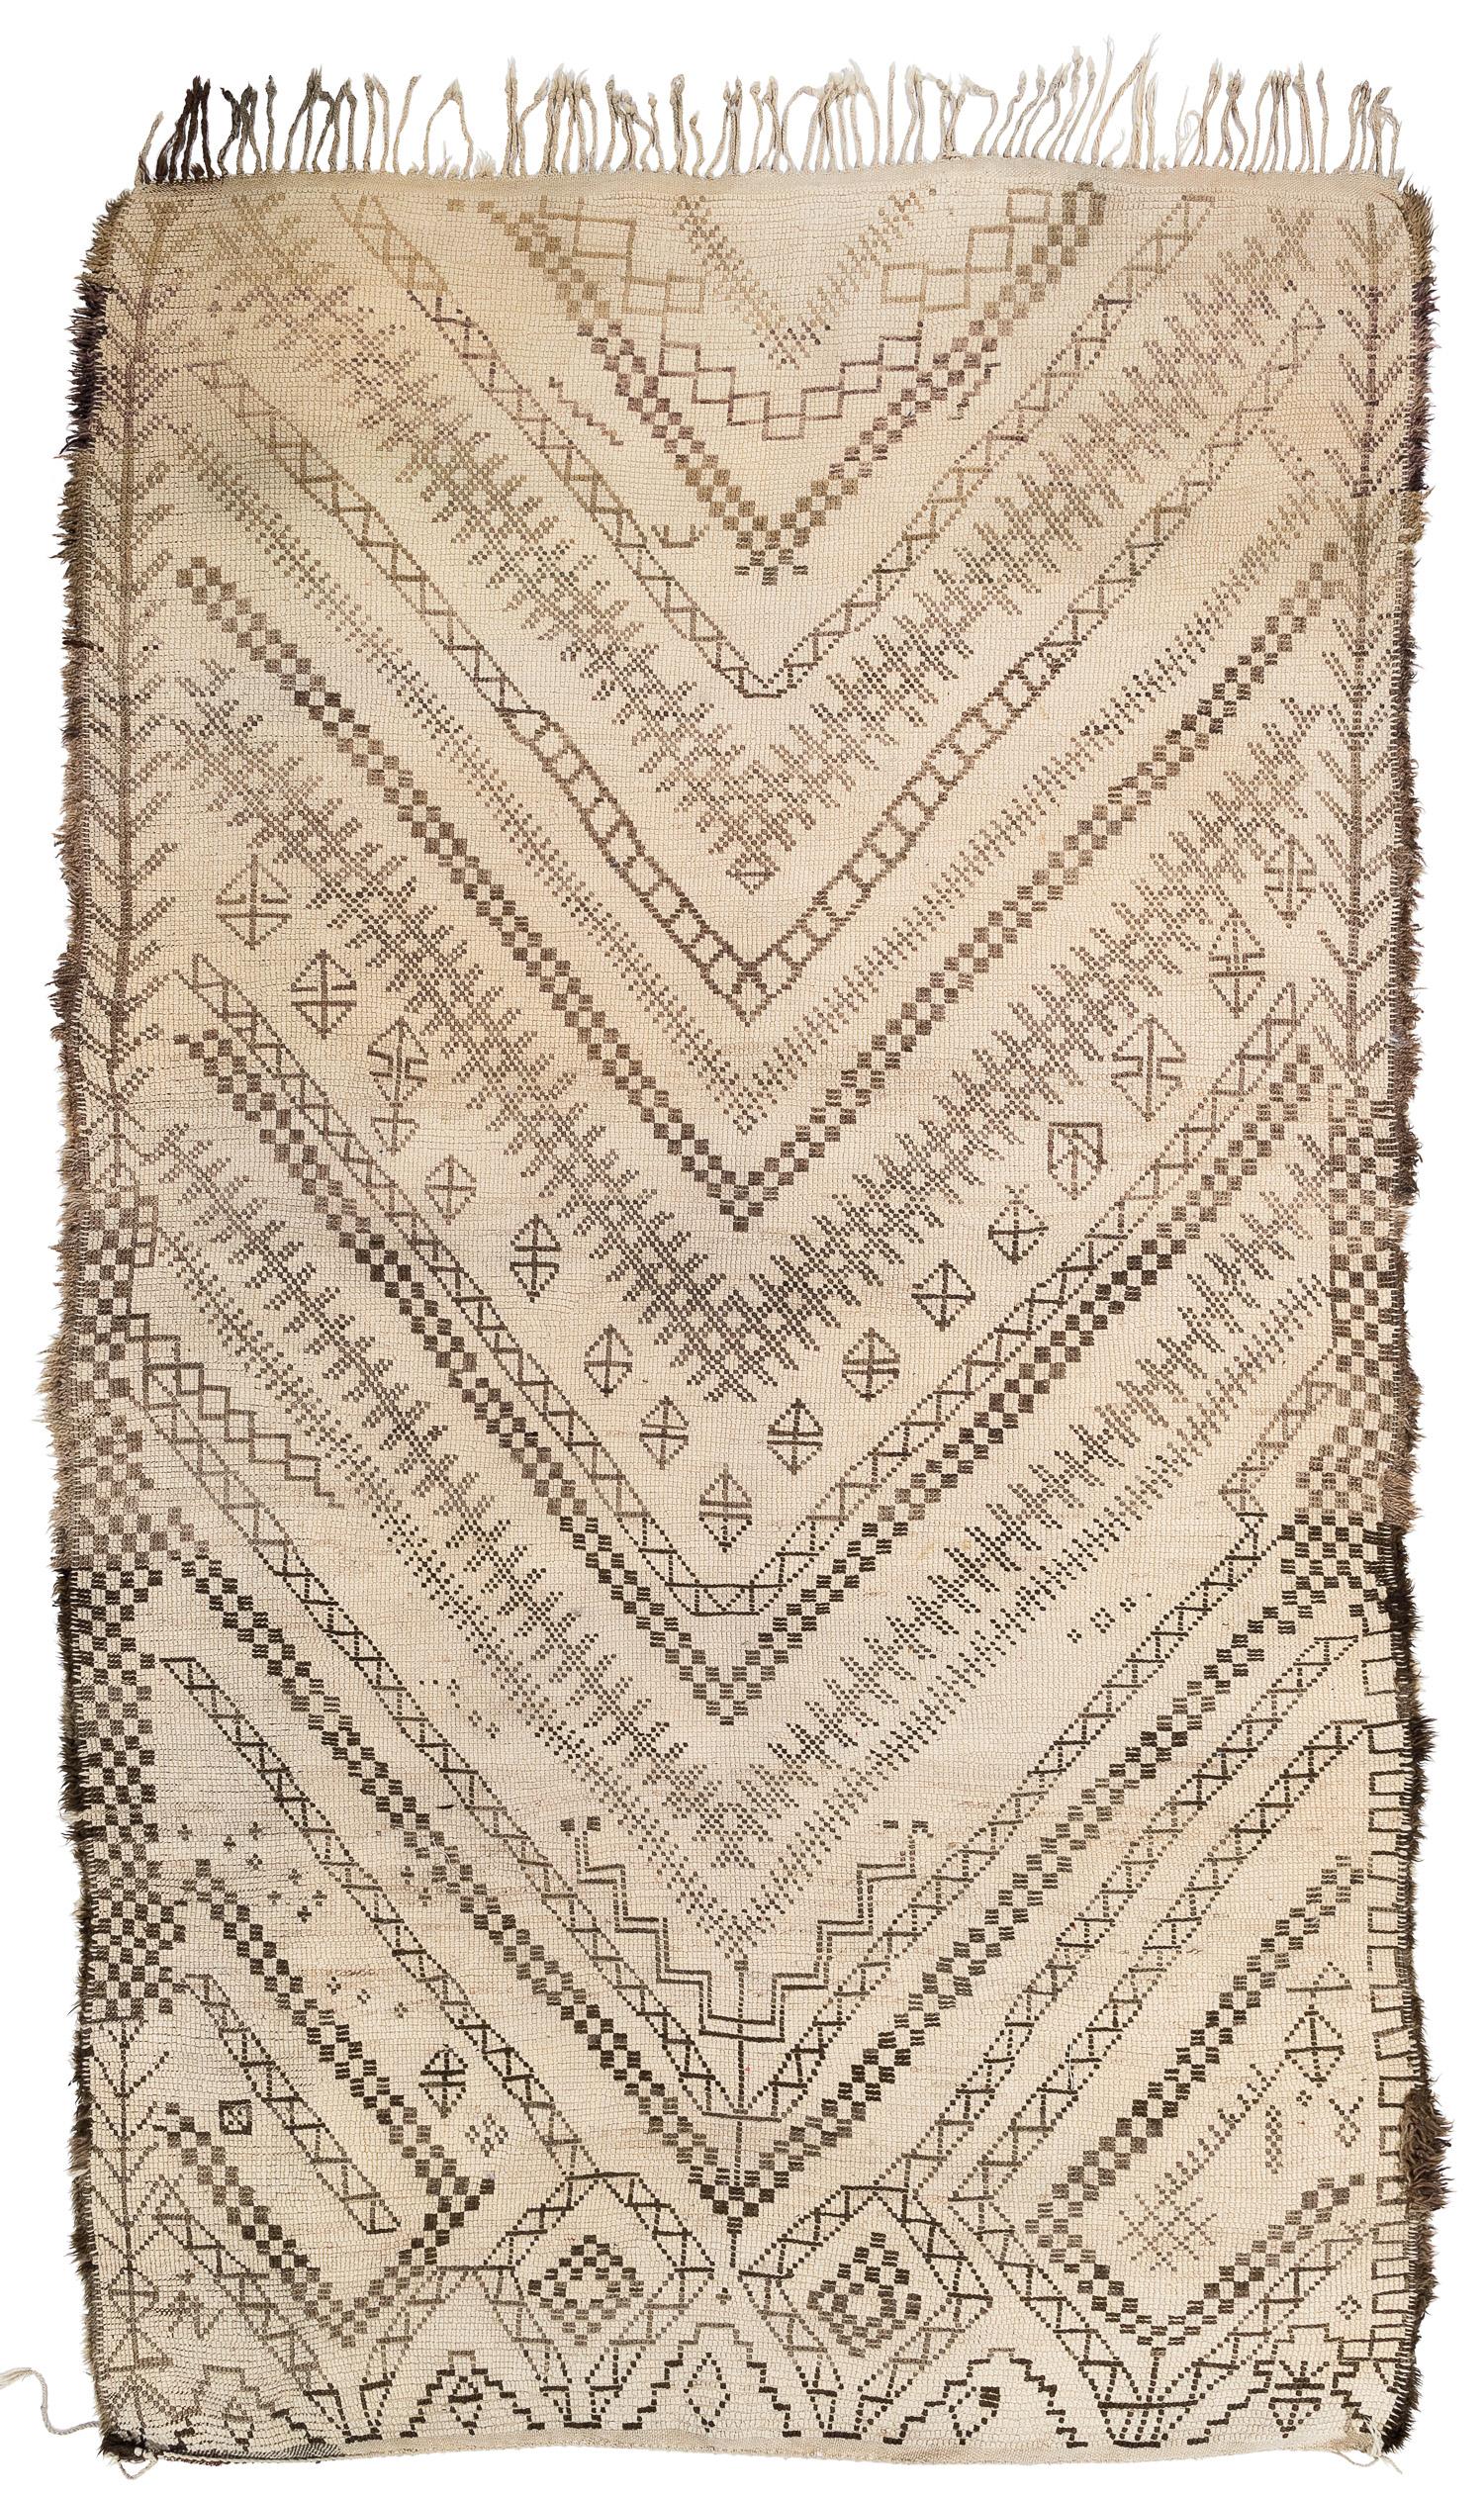 This vintage Moroccan rug is unique in that it has an unusual width of almost 7'. It is very heavy with a dense structure. The pile is quite high and the classic 'V' pattern has a soft contrast in color. It is woven in great wool and very densely